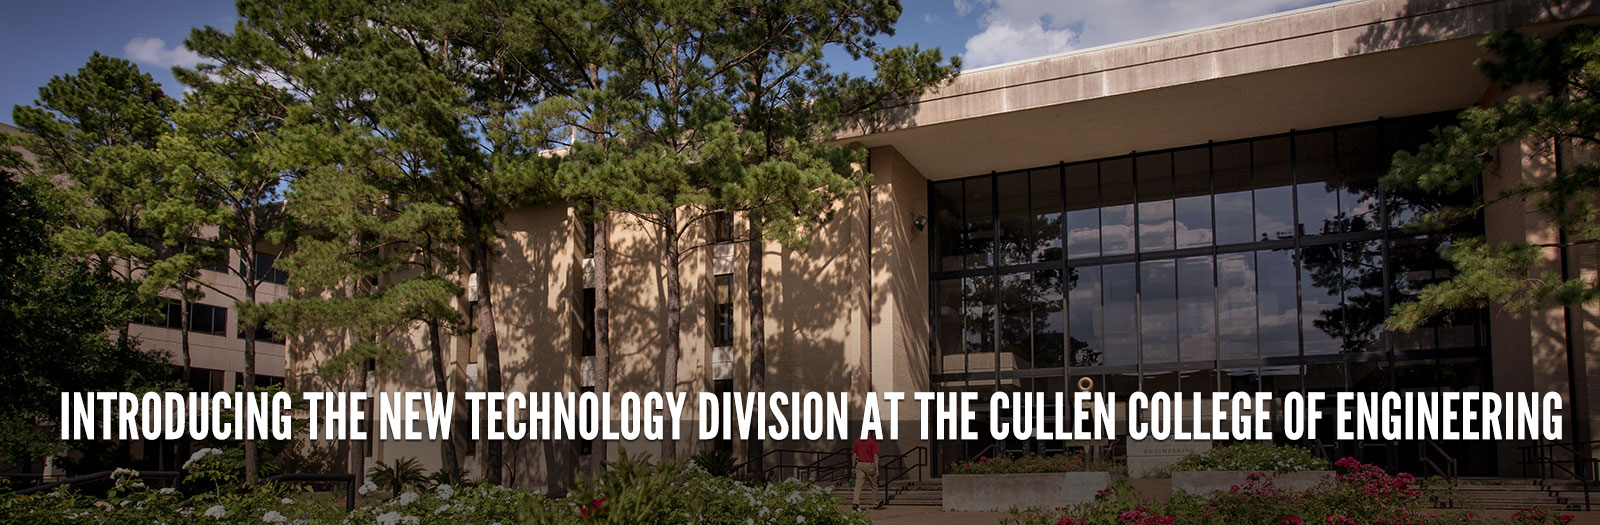 Introducing the new Technology Division at the Cullen College of Engineering